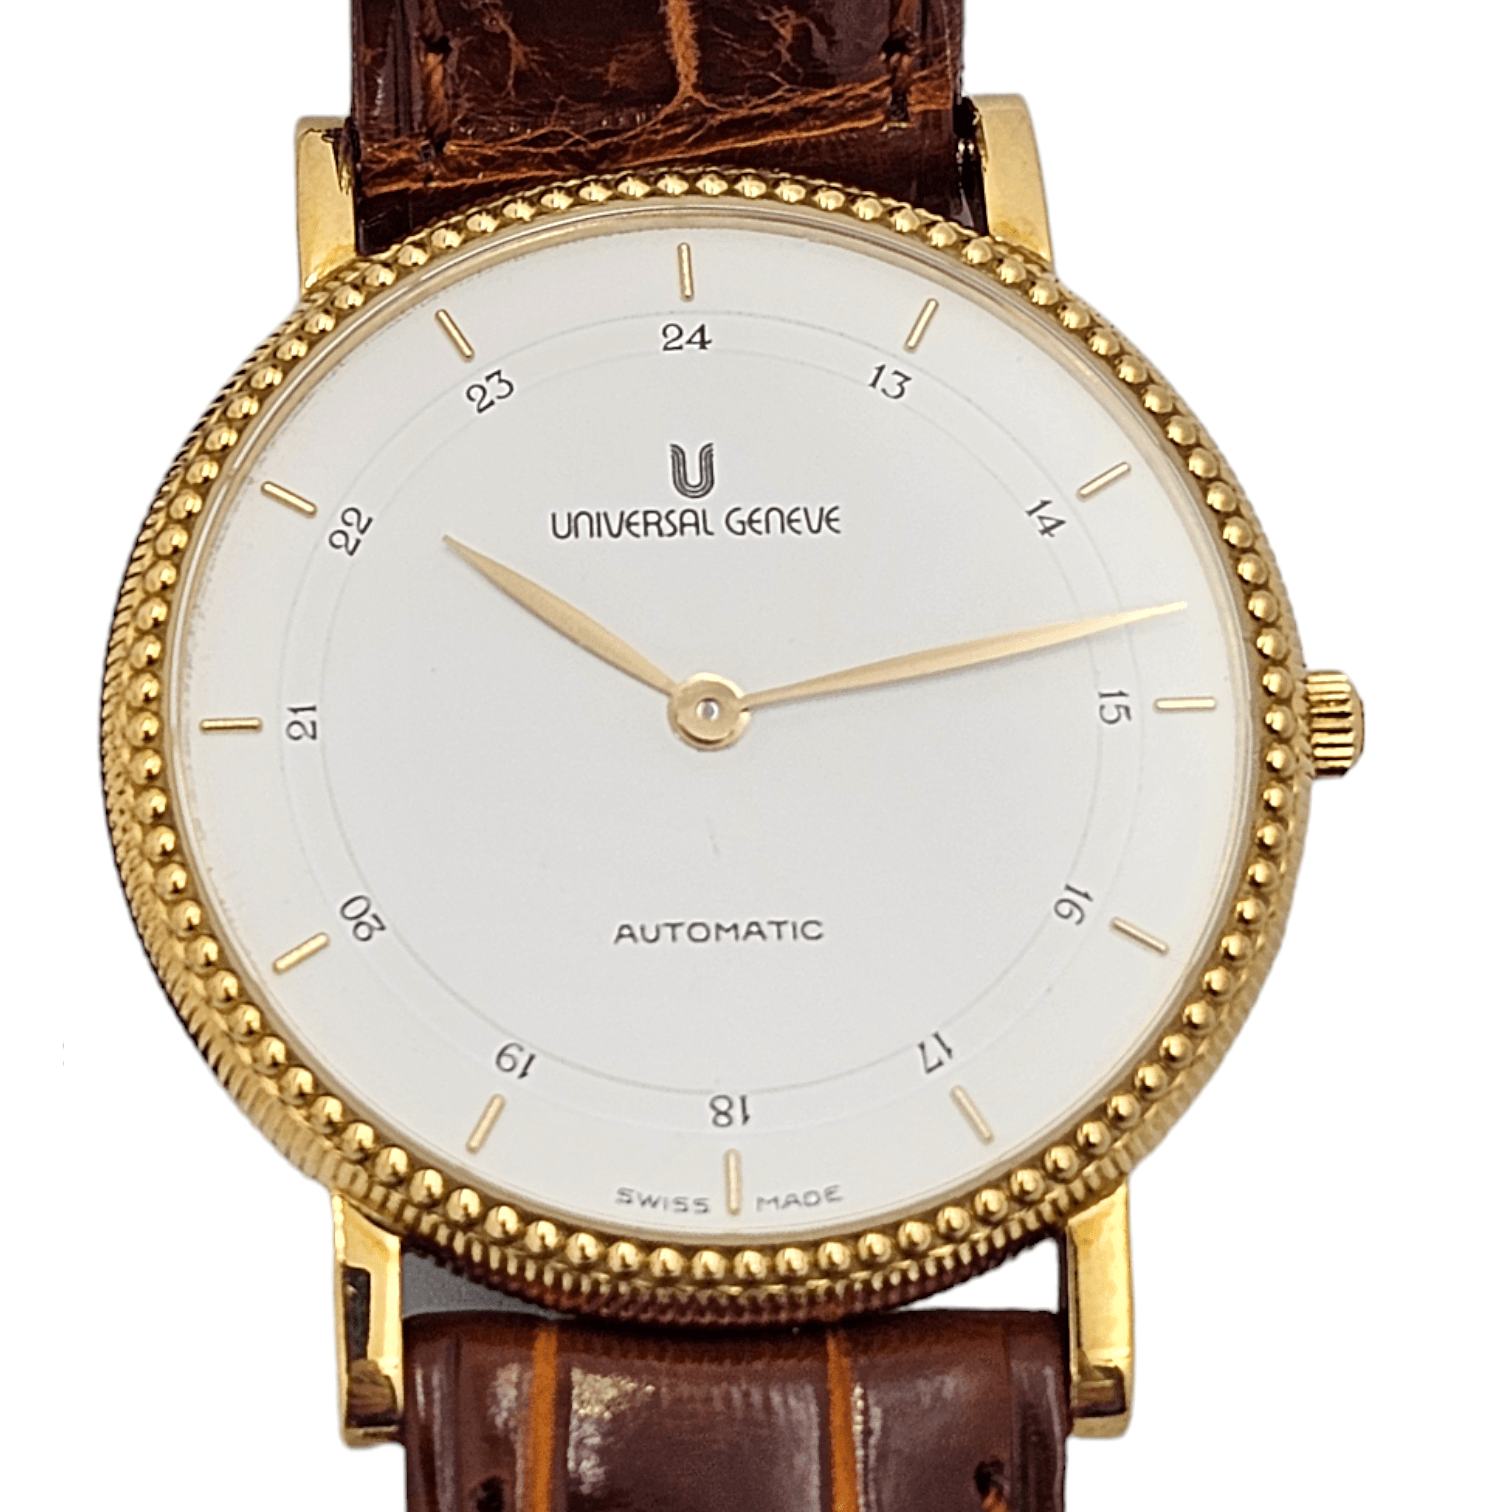 Universal Genève Microtor - Micro rotor Gold 18 kt Ref. 151.11.611 - ON5939 - LuxuryInStock